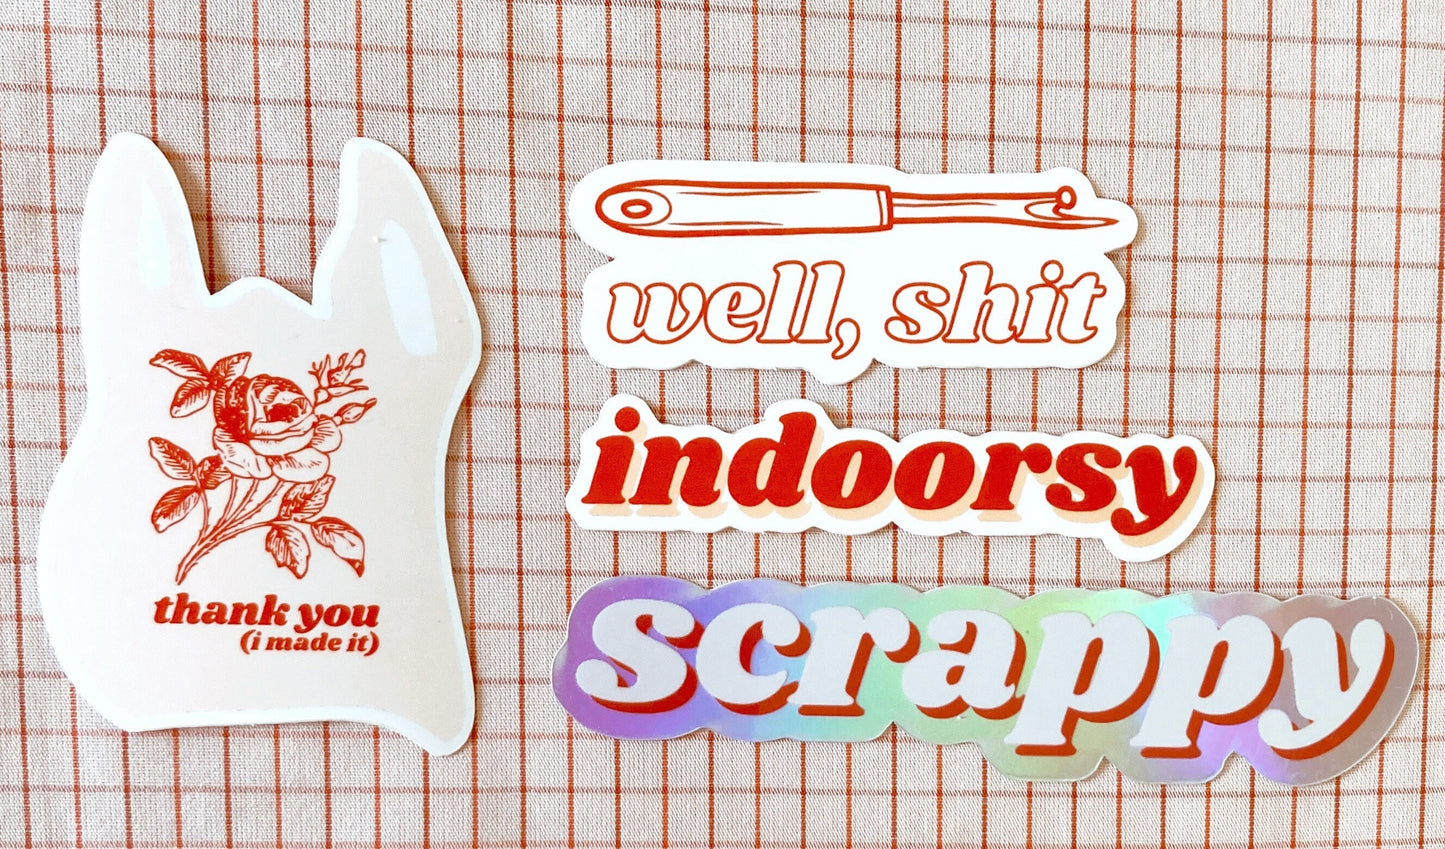 Quilting sewing vinyl sticker pack, scrappy, indoorsy, seam ripper, thank you bag